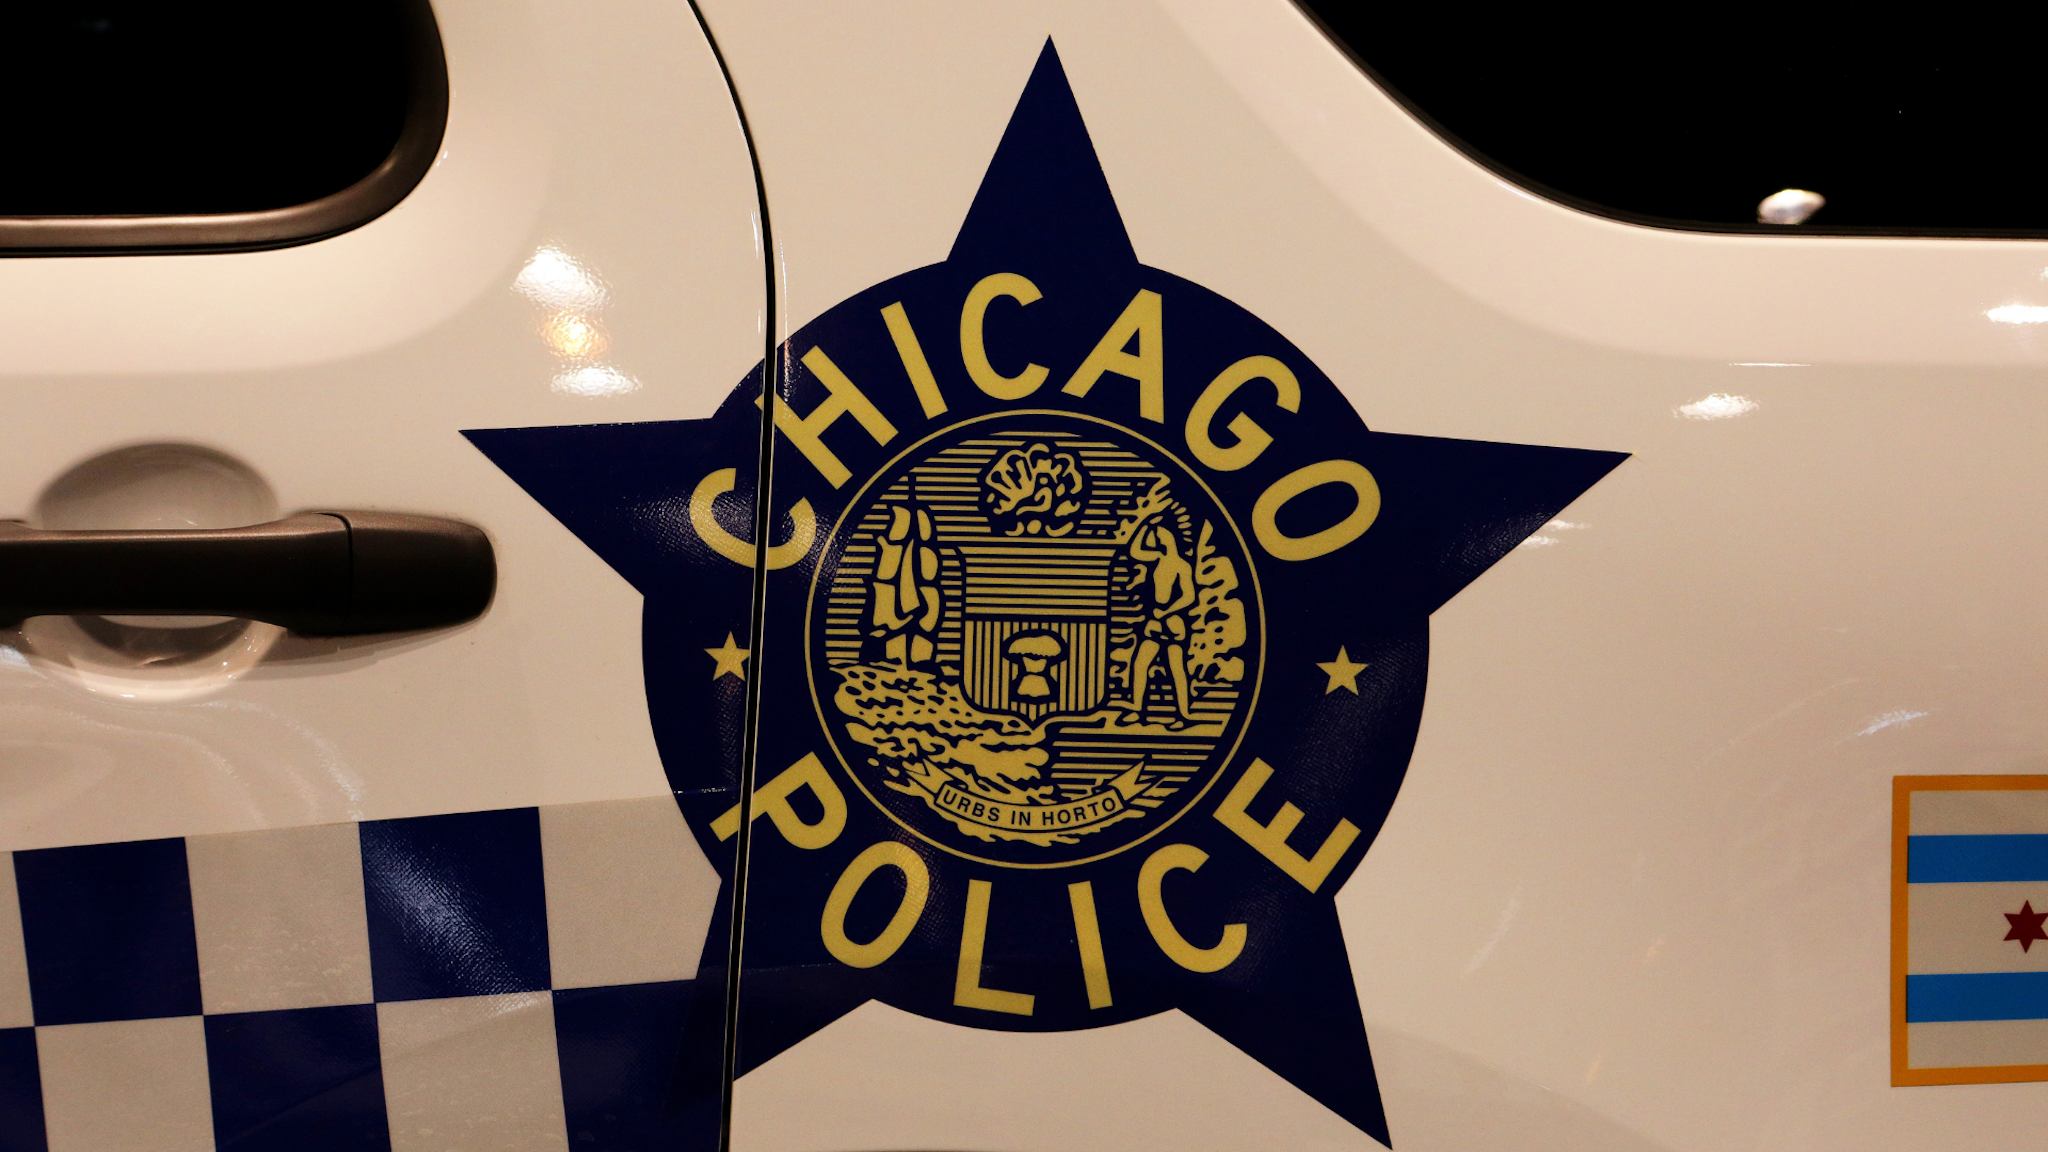 A Chicago Police decal on a Chicago Police vehicle is on display at the 112th Annual Chicago Auto Show at McCormick Place in Chicago, Illinois on February 6, 2020.